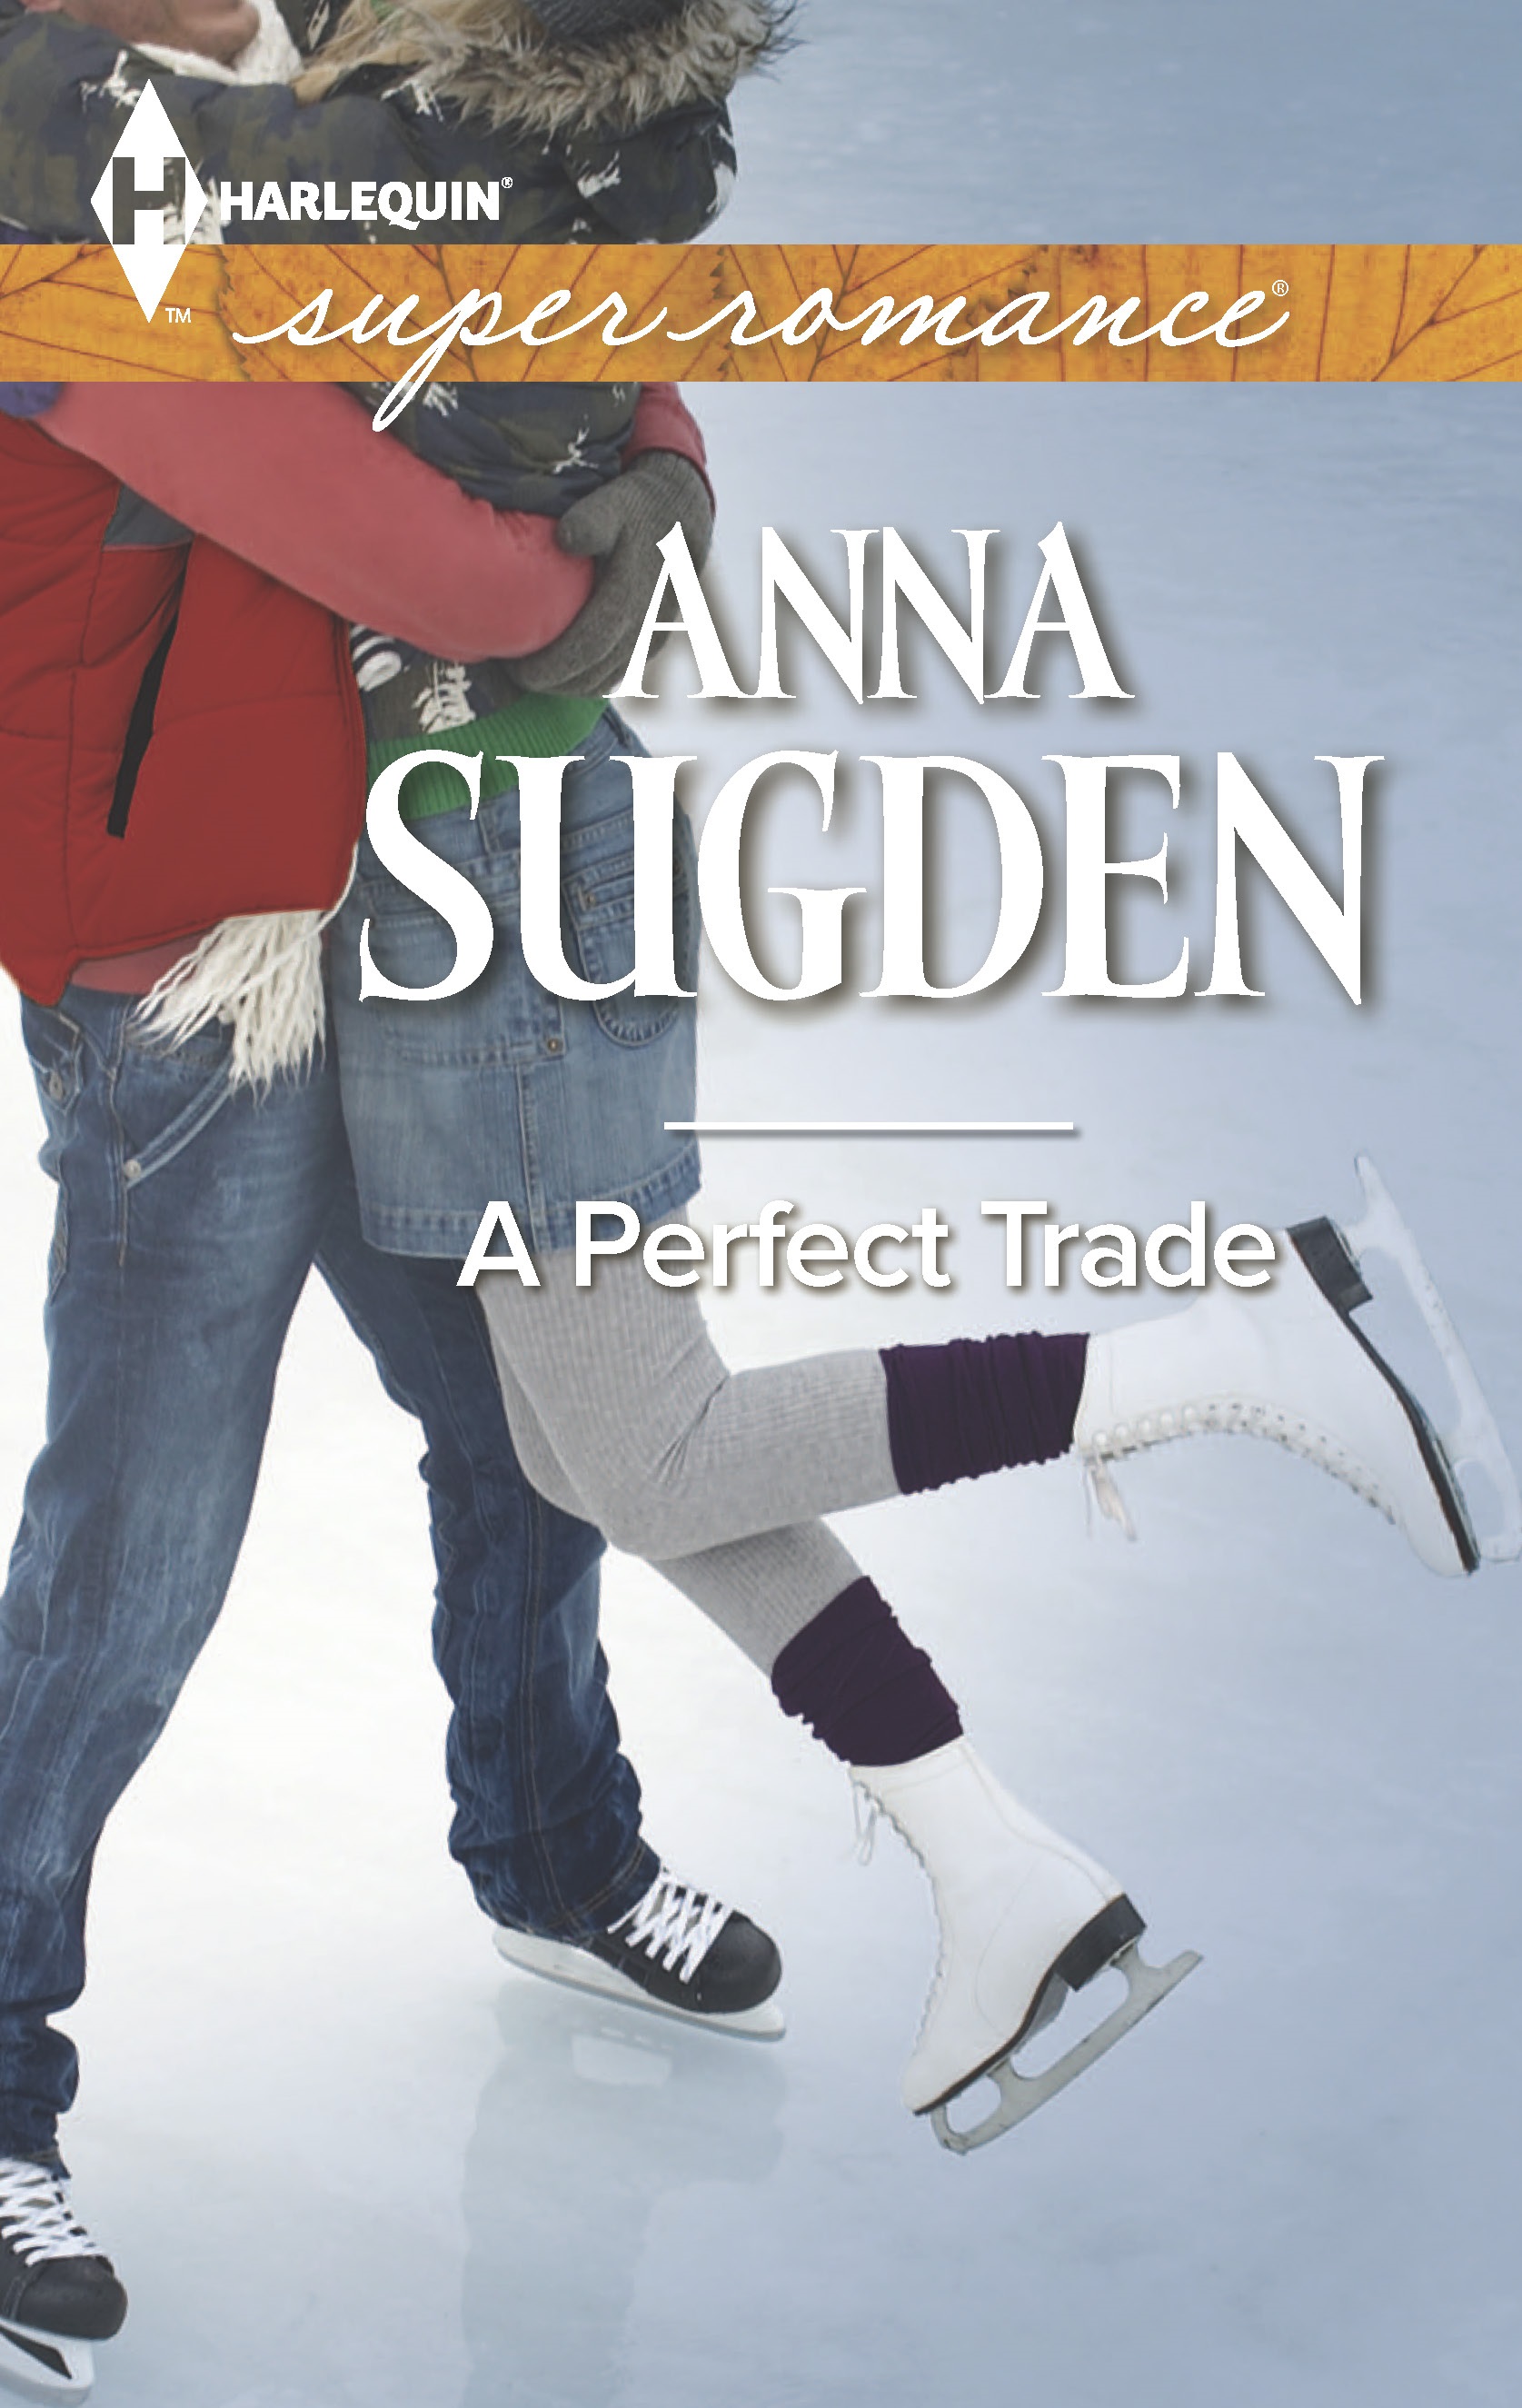 %name Winter Extravaganza Day 3 : Anna Sugden and Terri L. Austin   Reviews, Excerpts and Giveaways!!!